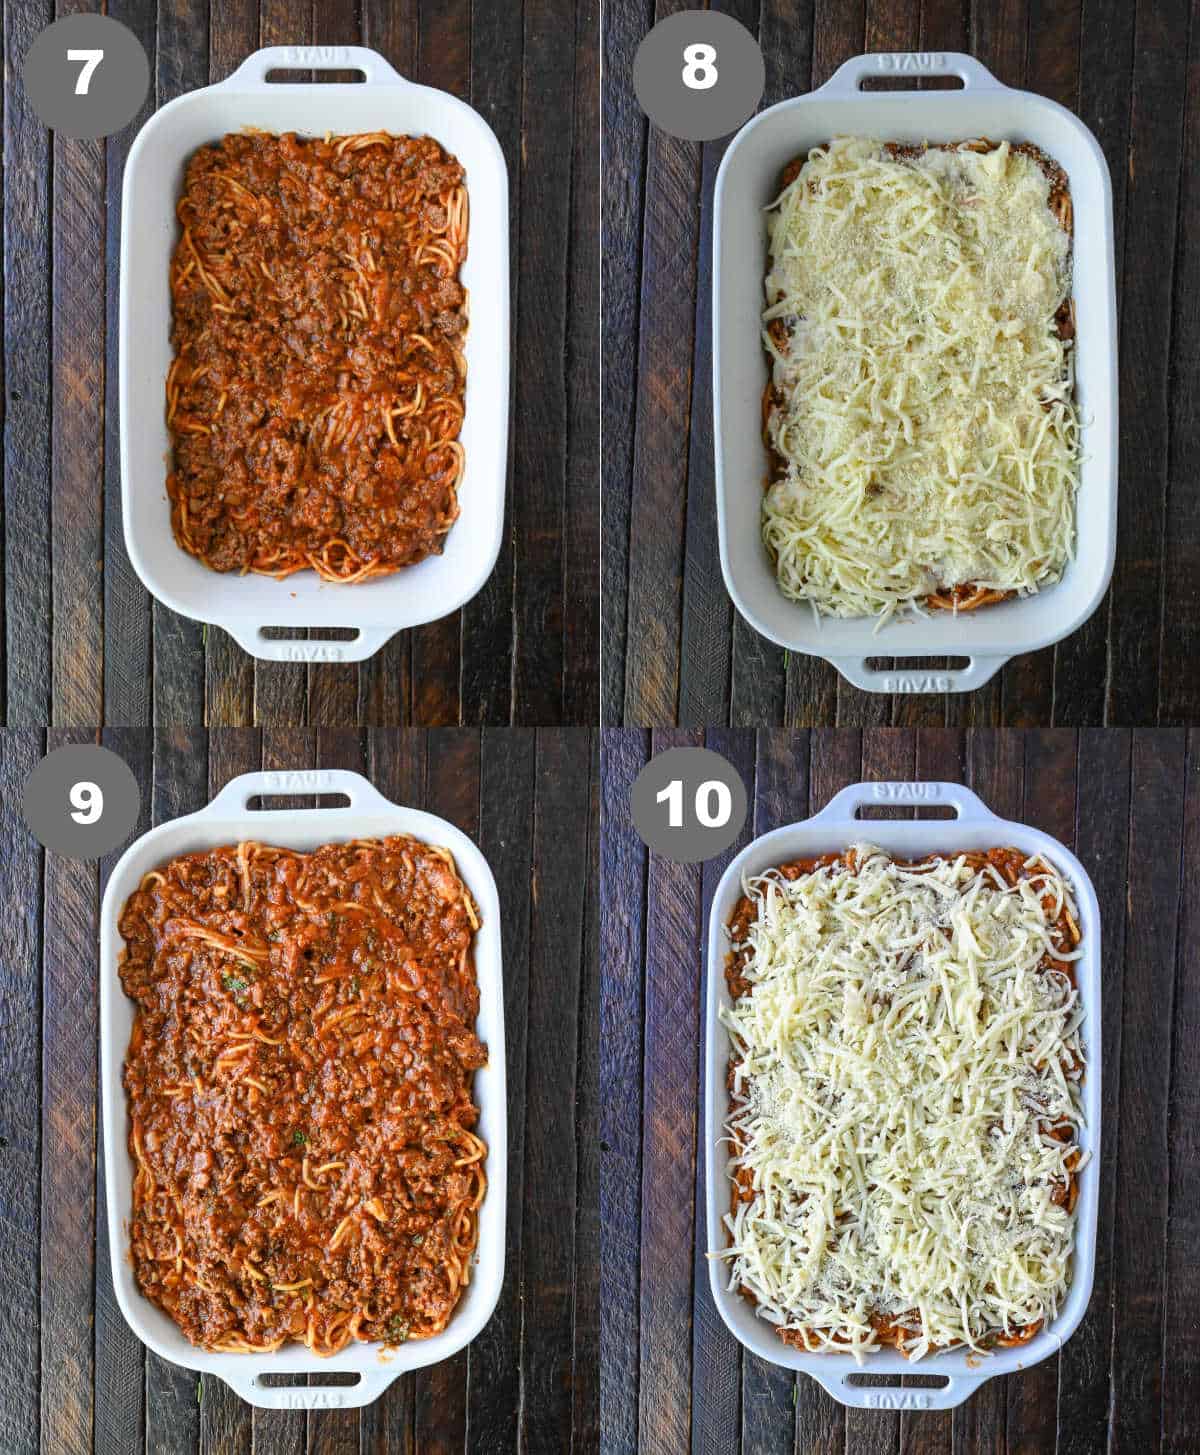 Baked spaghetti that has been layered in a casserole dish.